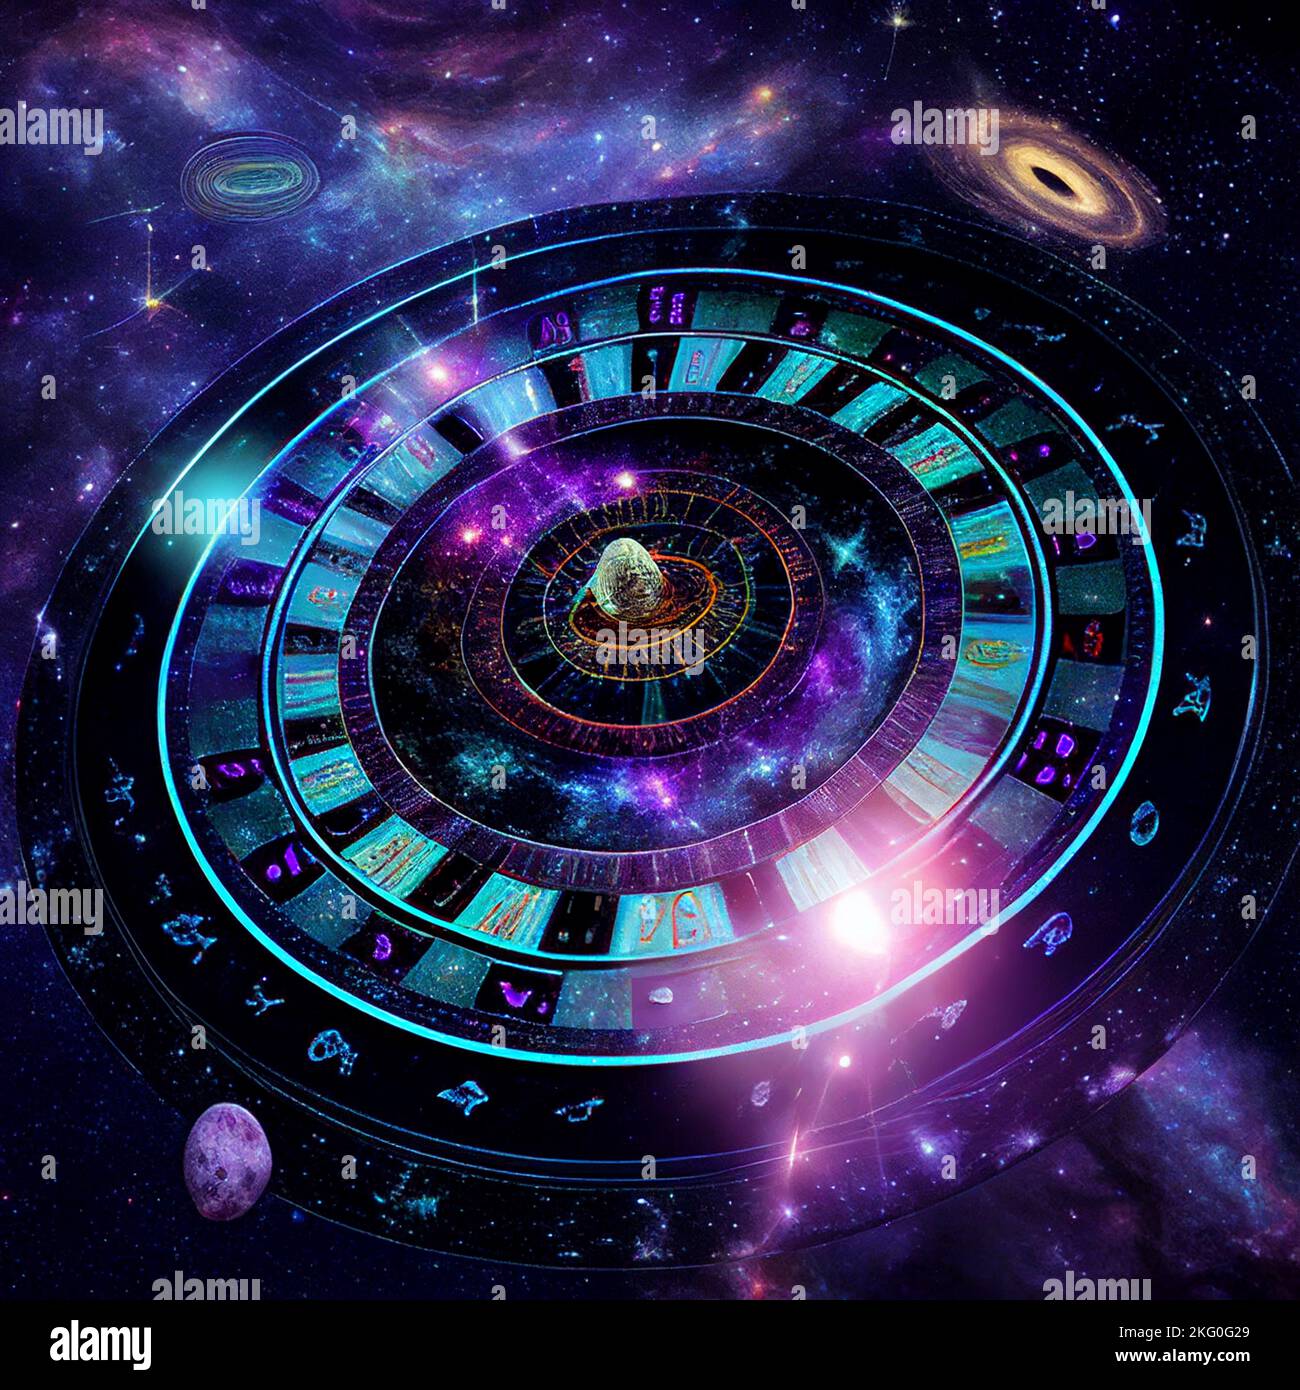 Futuristic casino with inter galactic roulette wheels, planets orbiting nearby, try your luck in the game of reality we find ourselves in Stock Photo